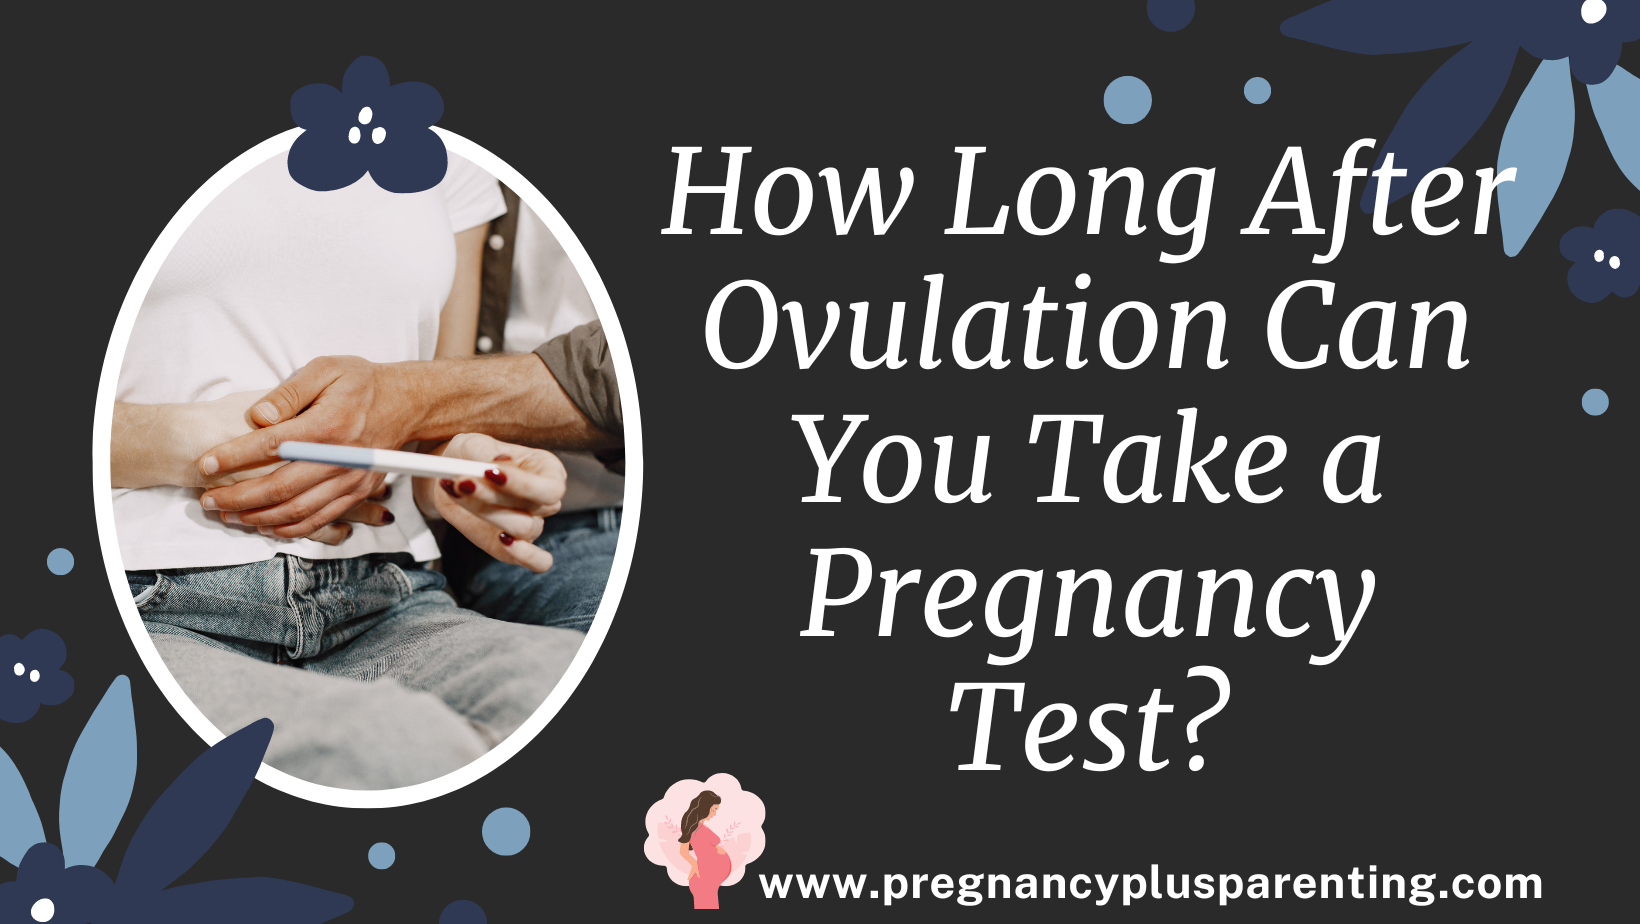 How Long After Ovulation Can You Take a Pregnancy Test?